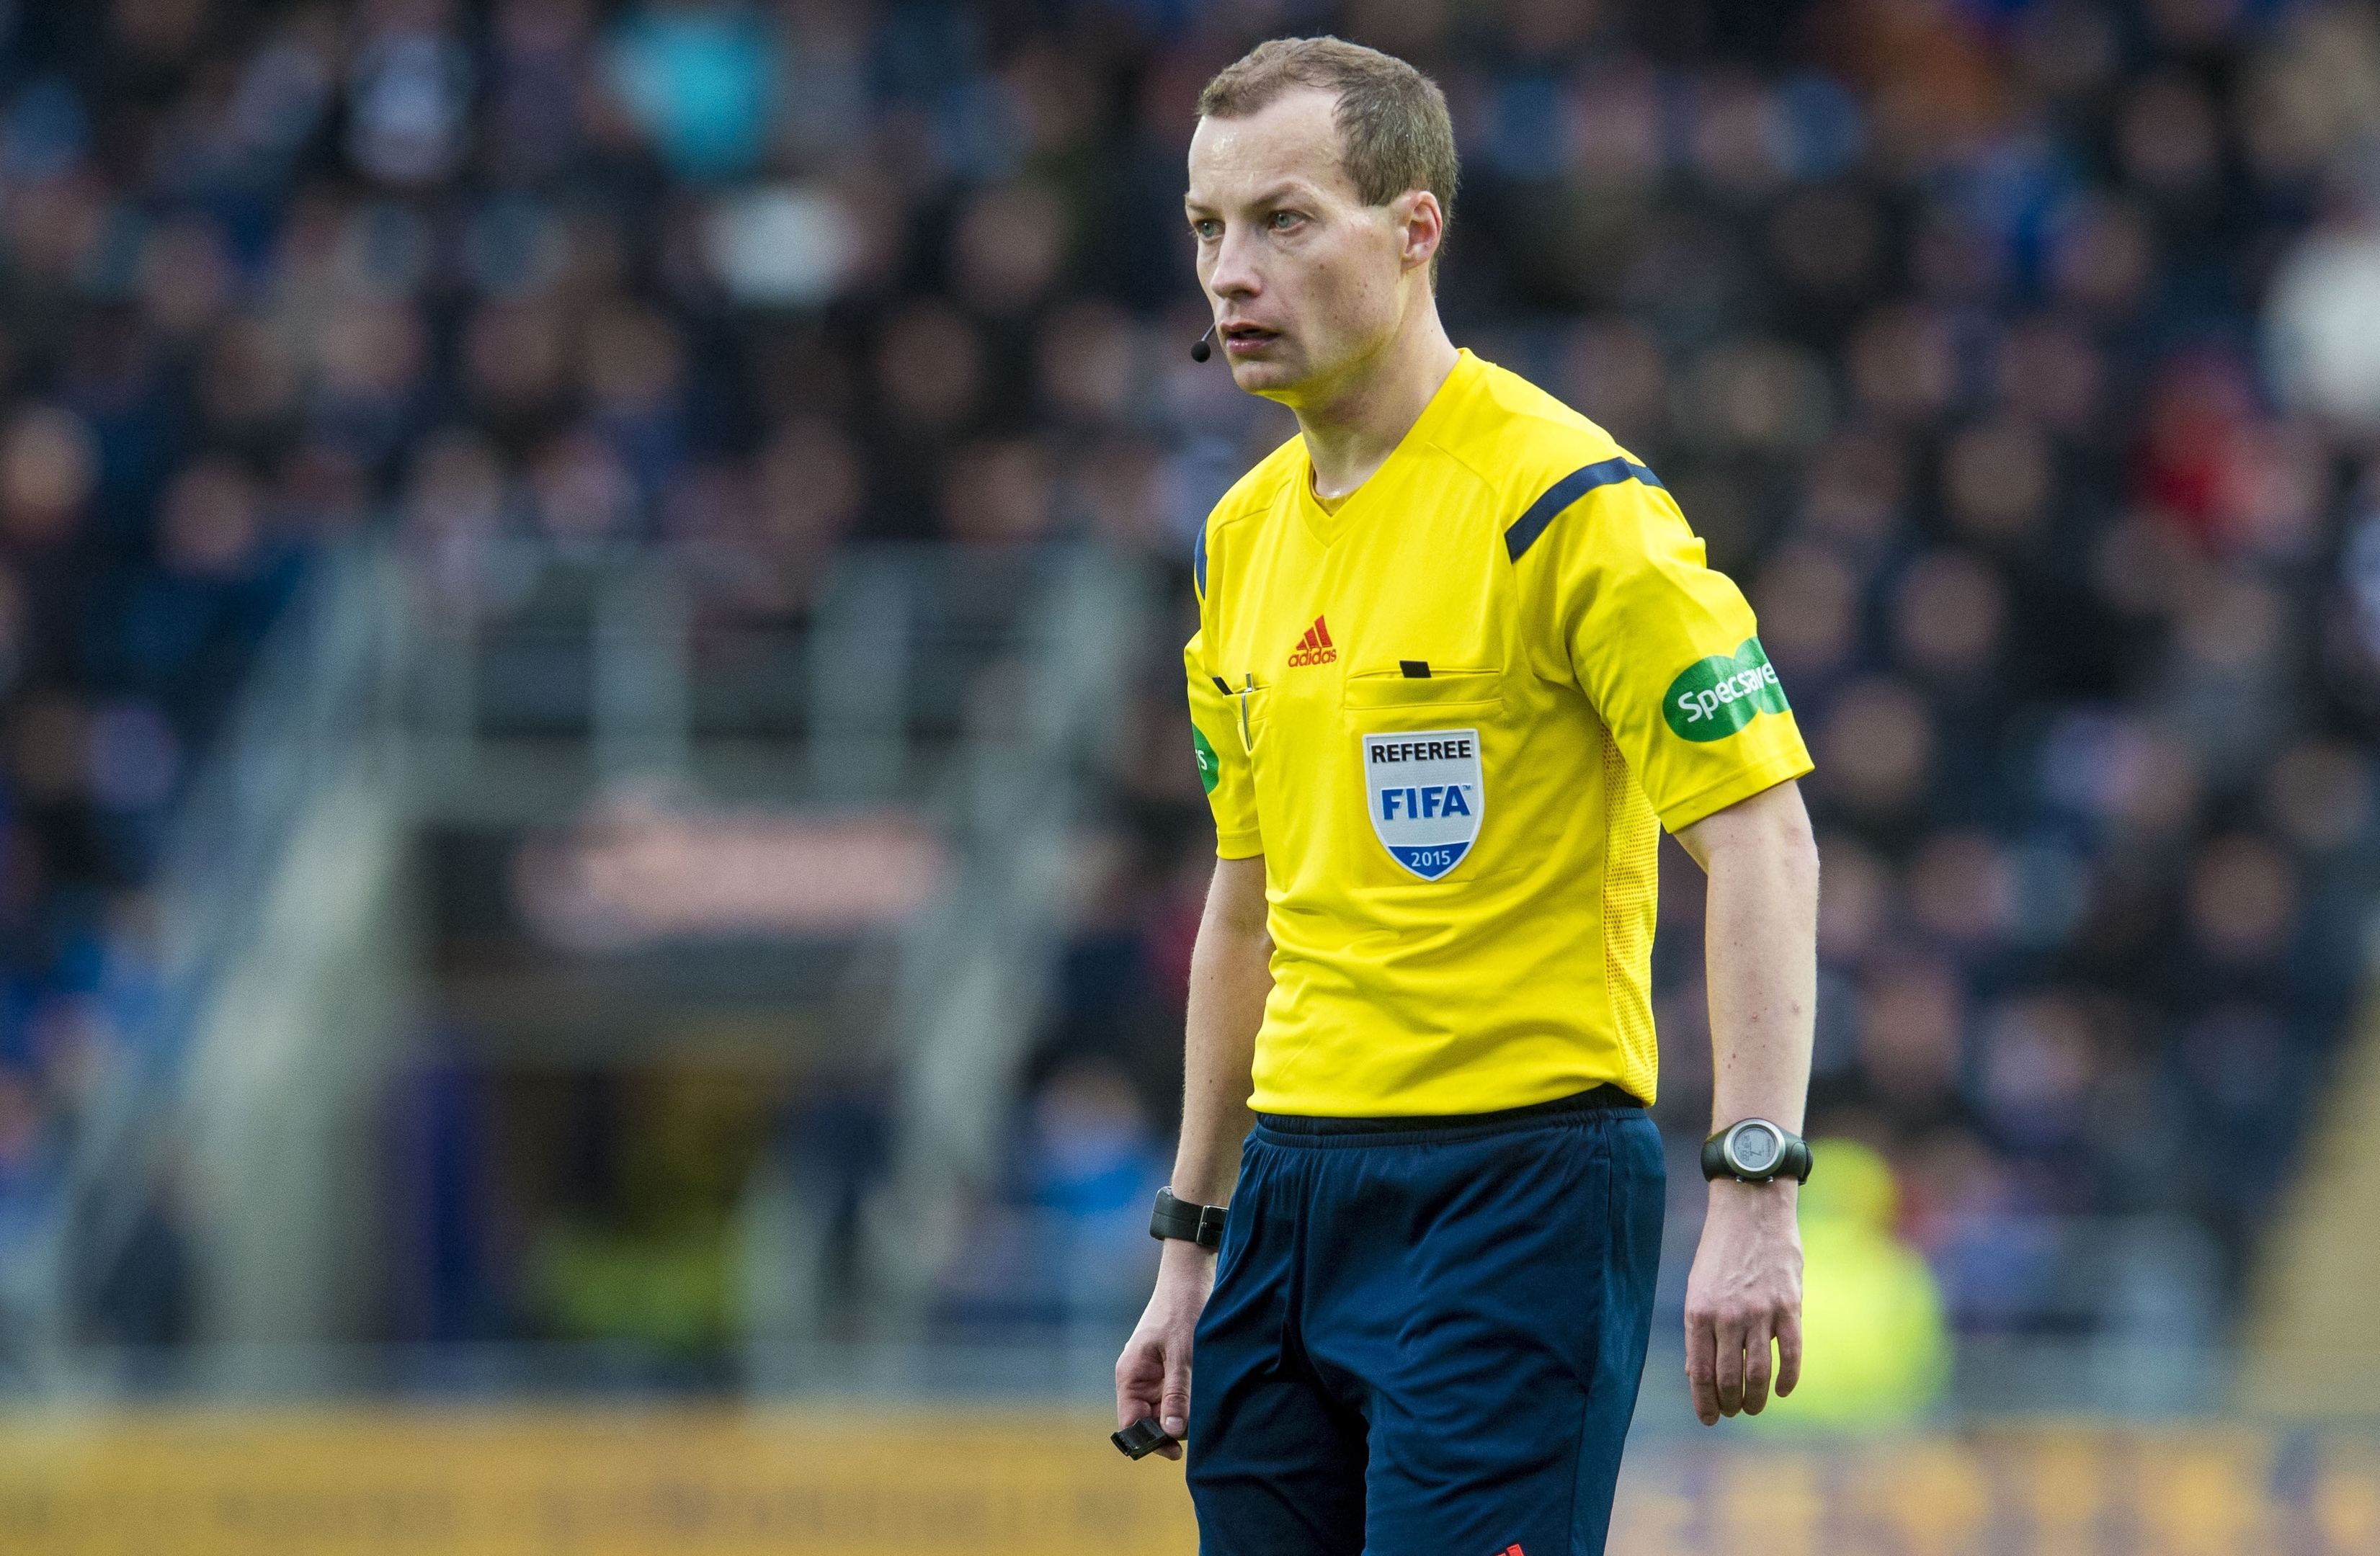 Referee Willie Collum at the Falkirk Stadium this afternoon 